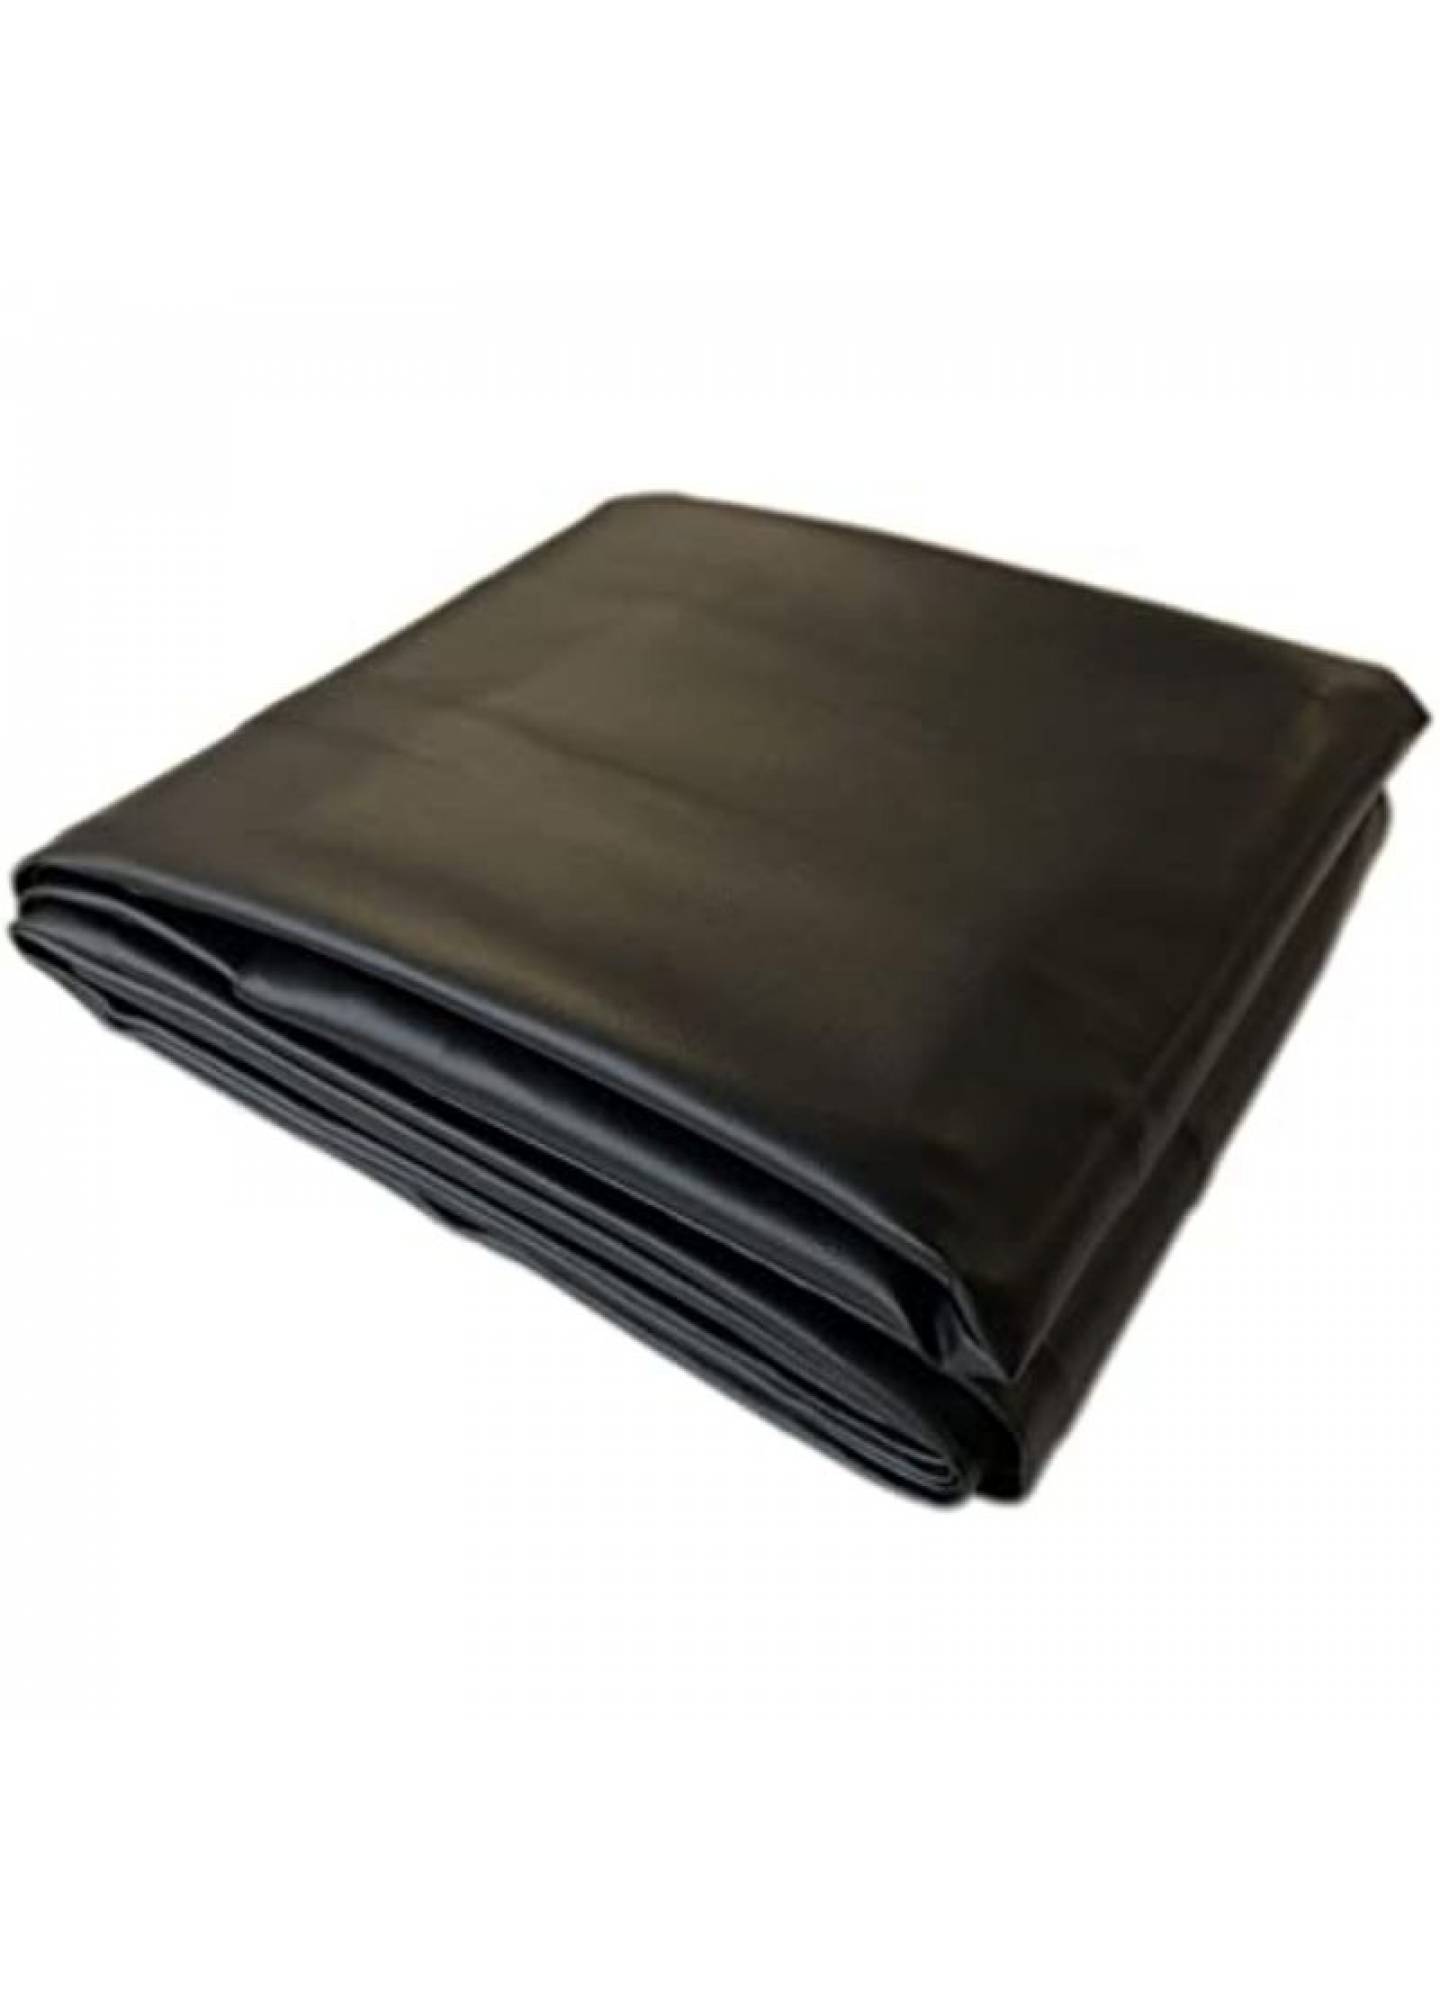 HEAVY DUTY LEATHERETTE POOL TABLE COVER